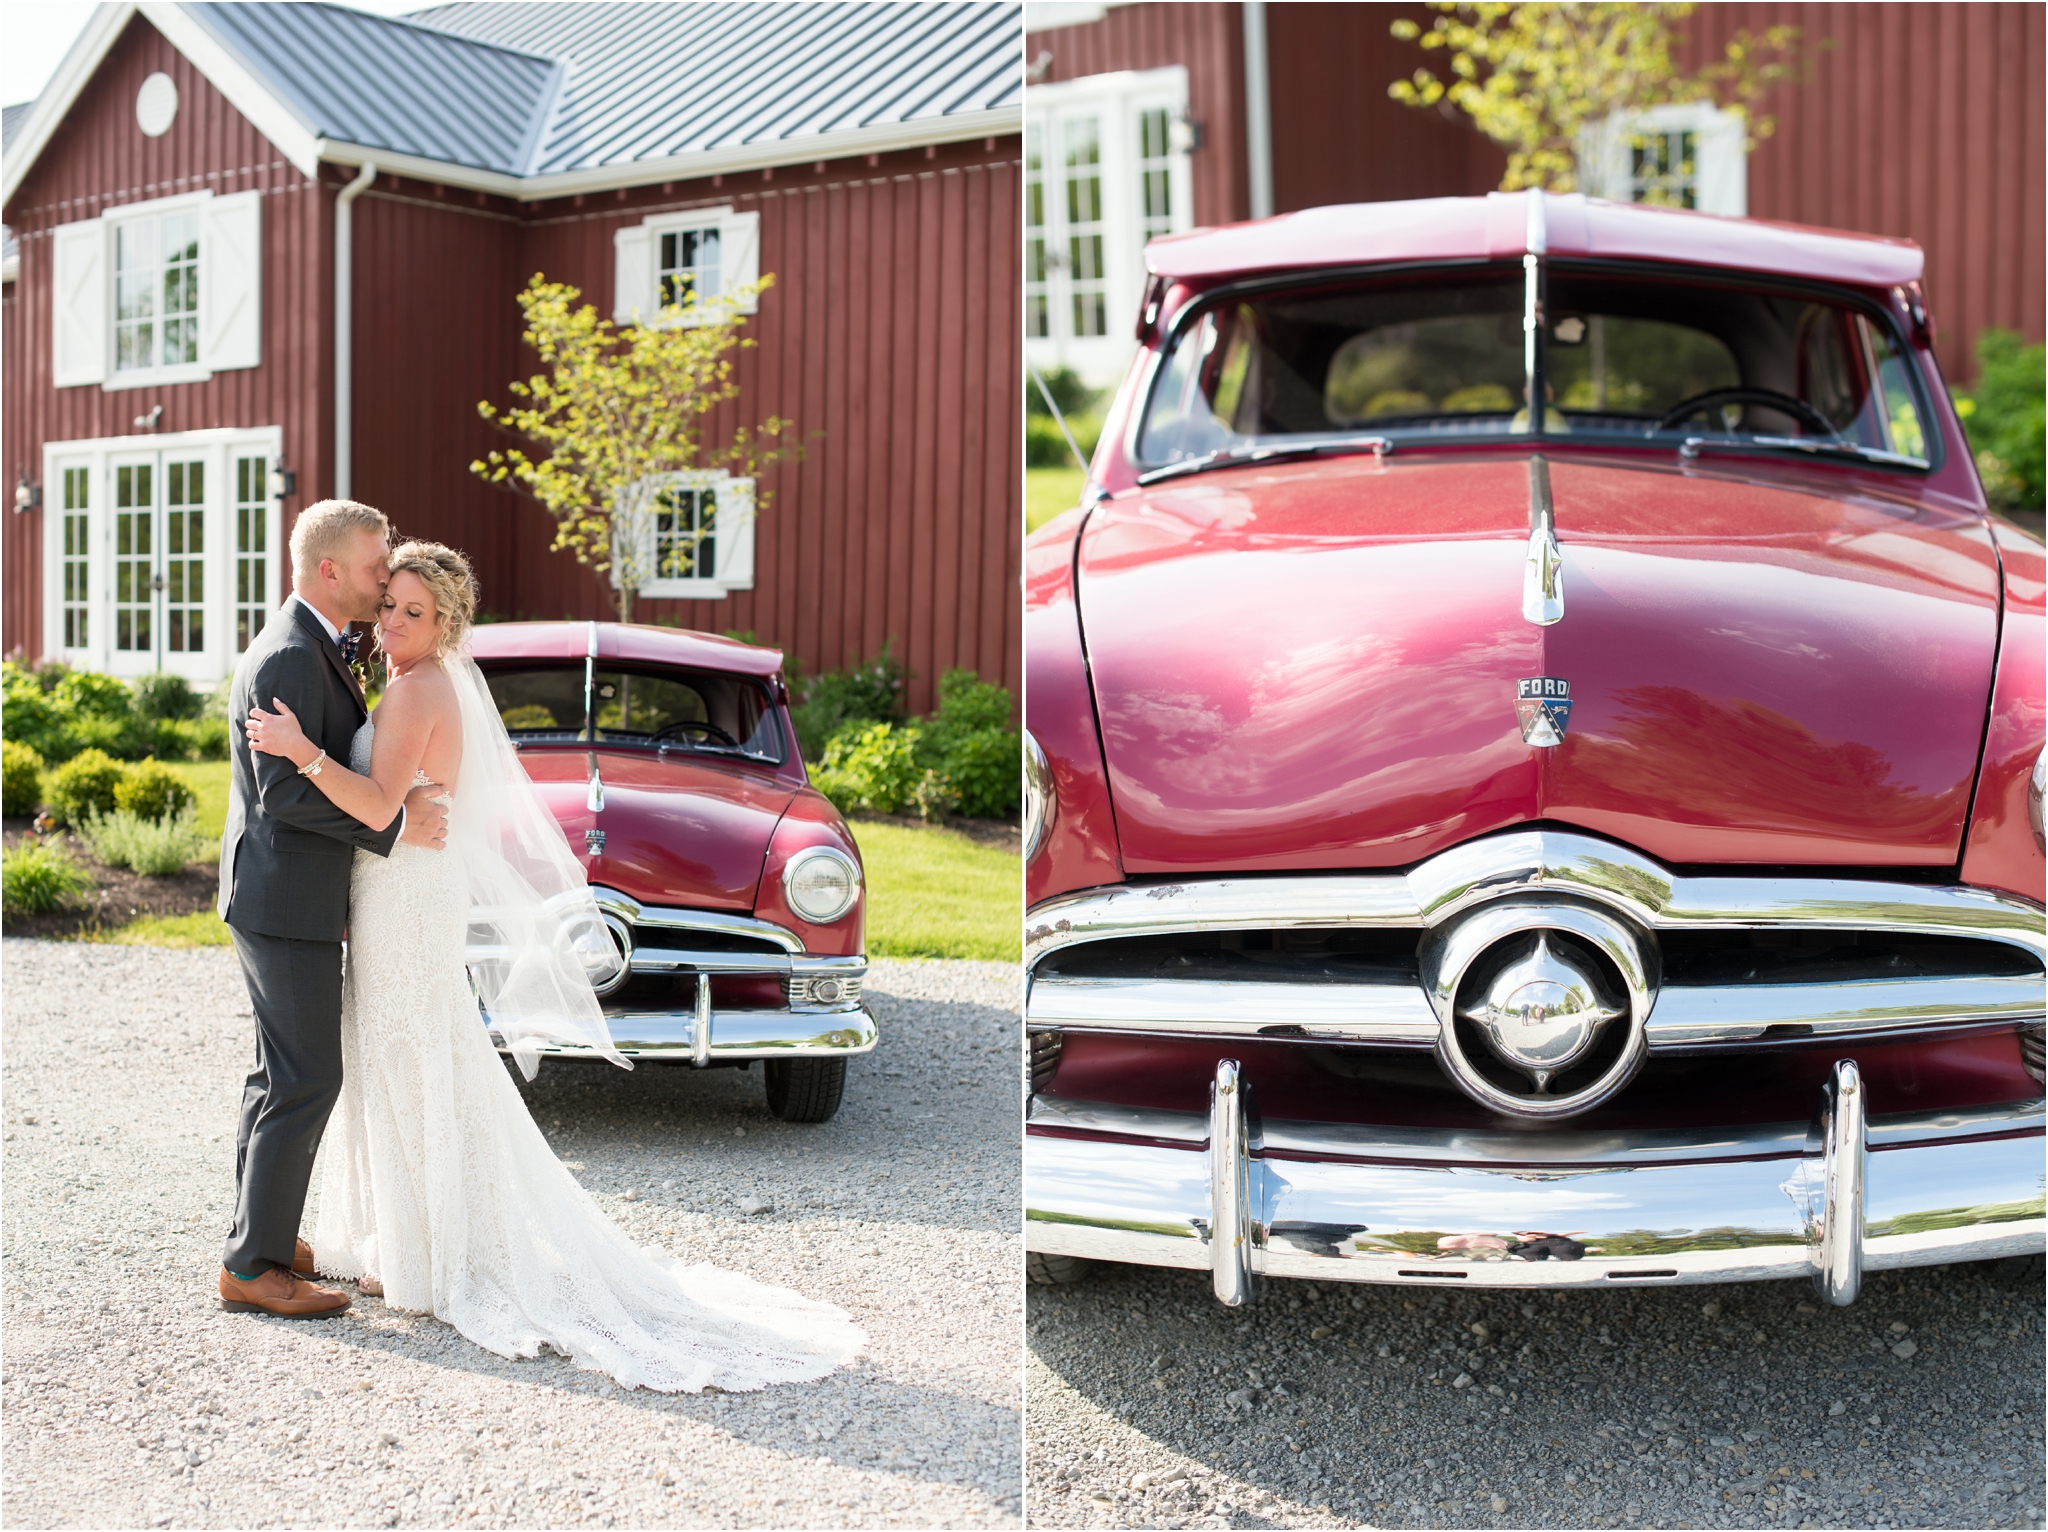 Lindley Farmstead at Chatham Hills | Sarah and Rachel Wedding Photographers | Westfield, Indiana wedding | red vintage car